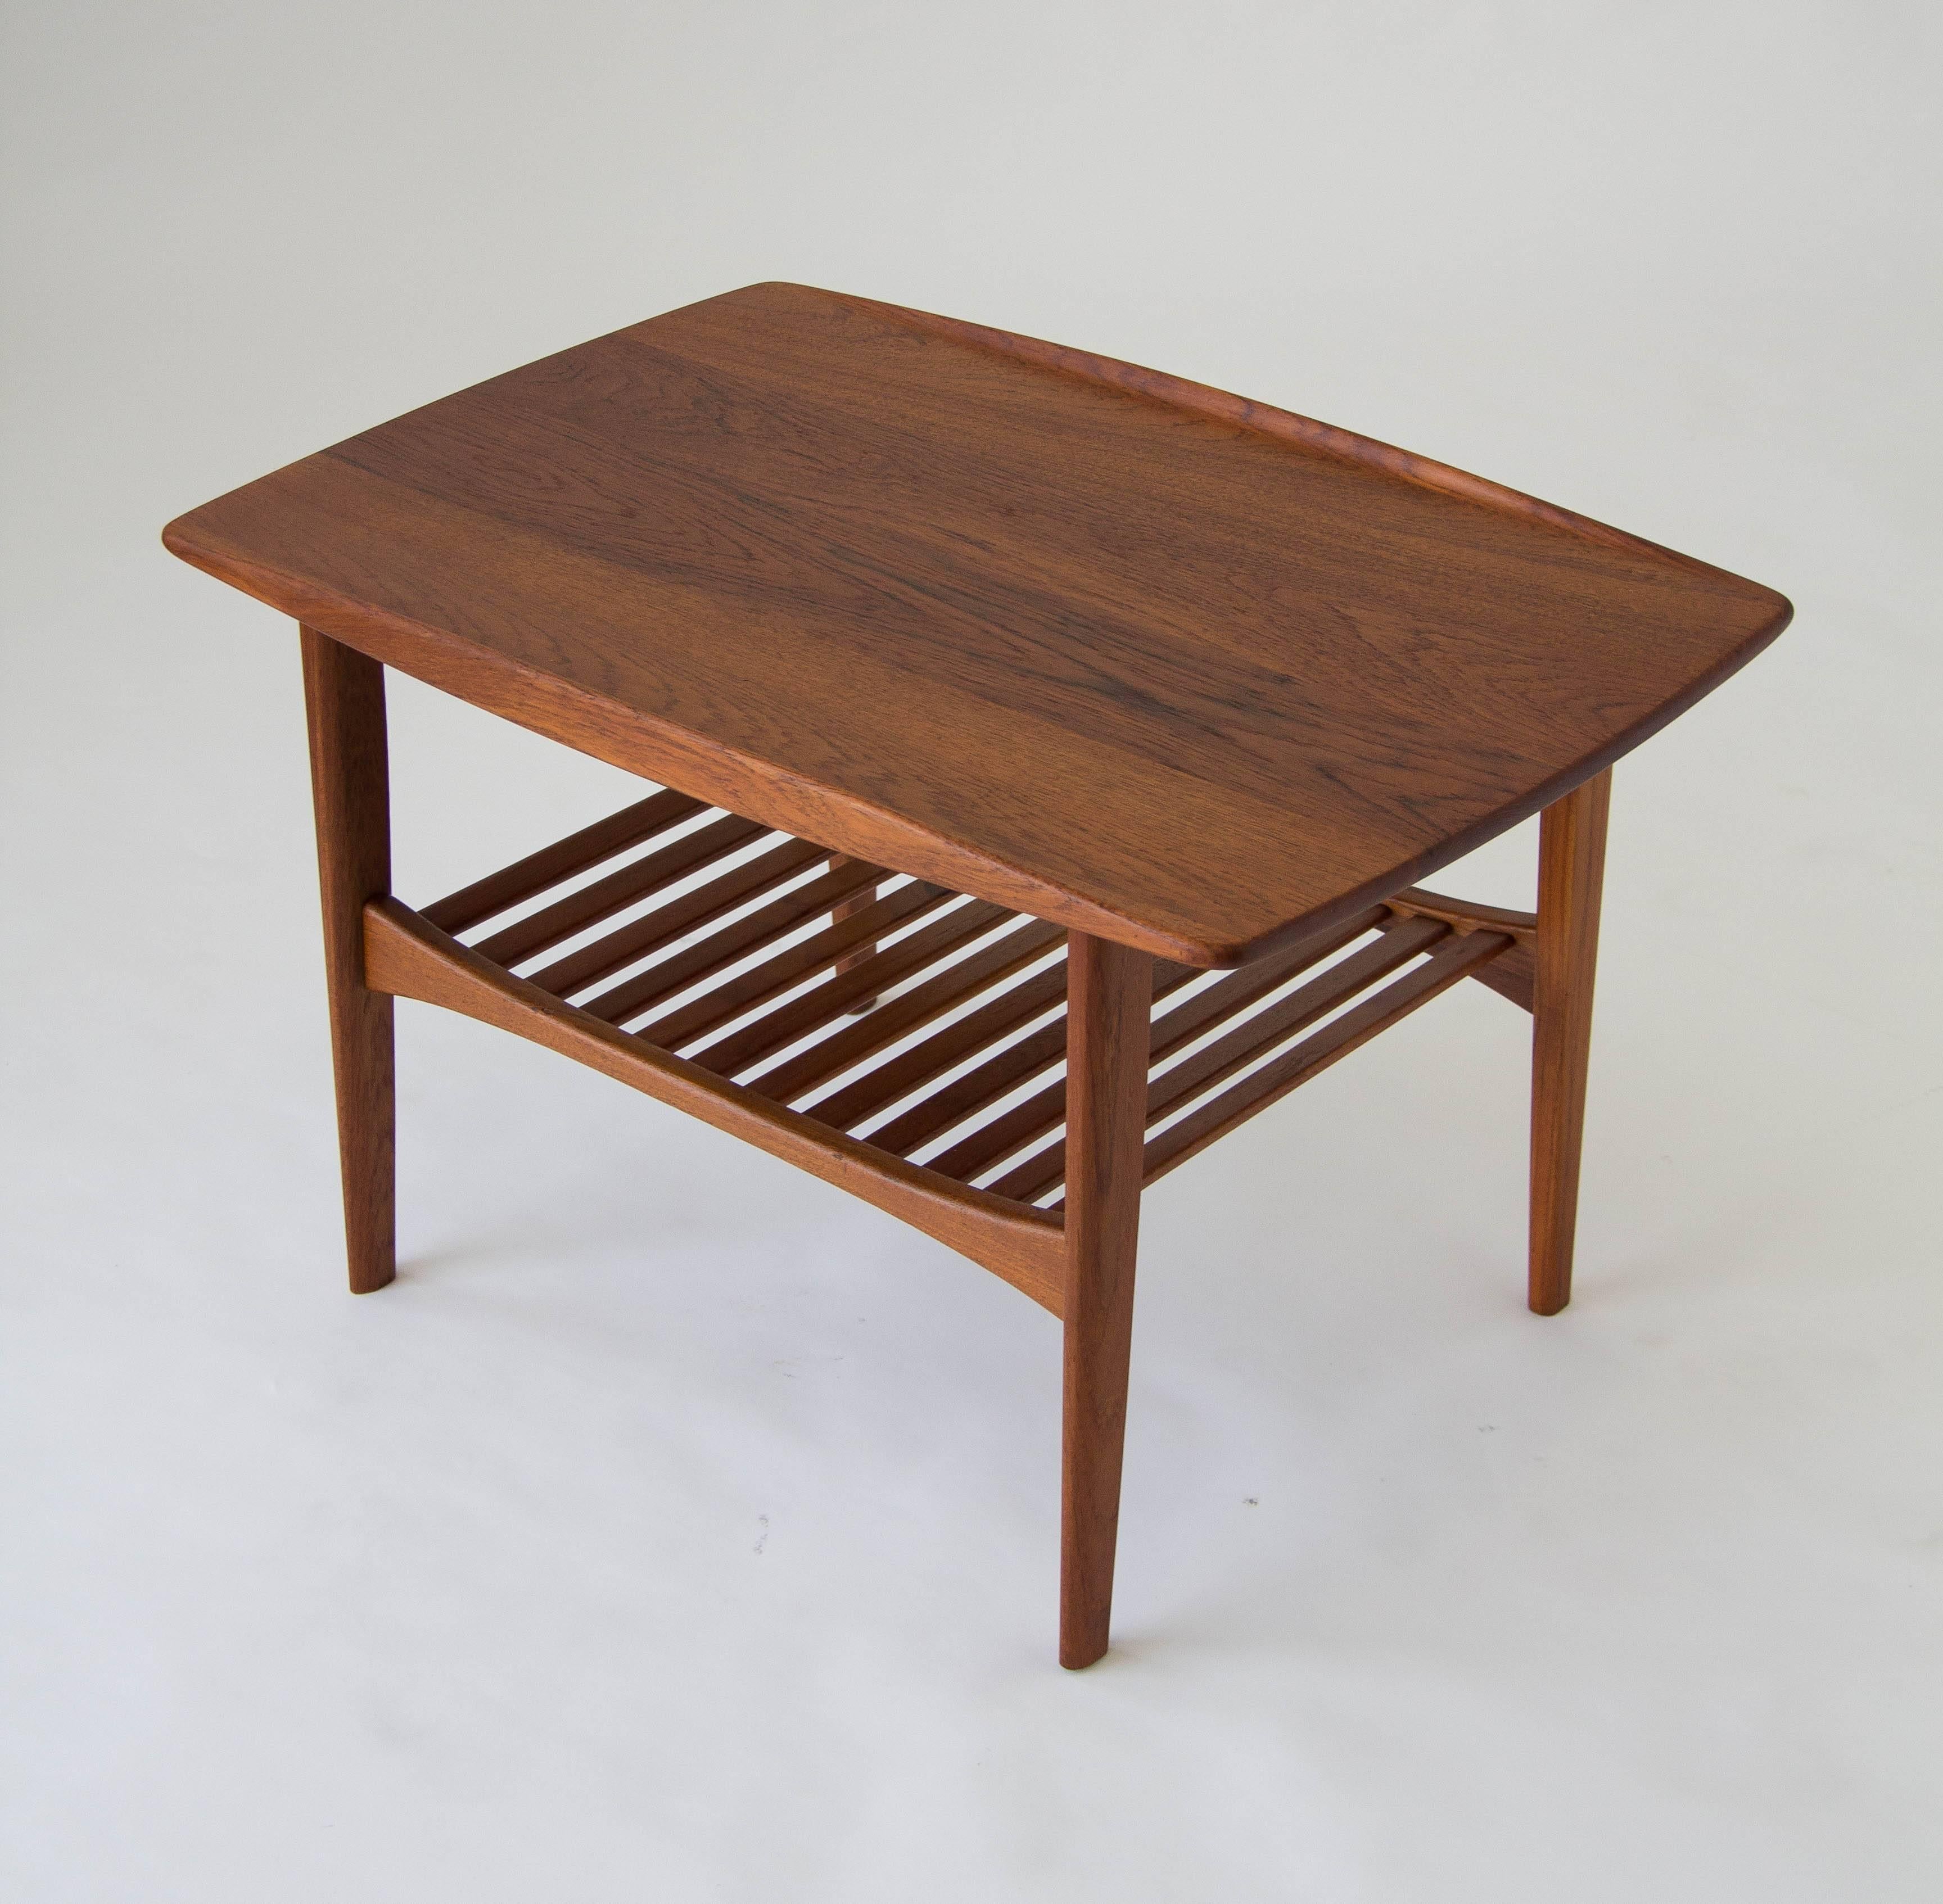 A model FD510 teak side table imported from Denmark by John Stuart, where it was designed by Edvard and Tove Kindt-Larsen and manufactured by France & Daverkosen. Made from solid teak, the tabletop has a rectangular shape with bowed end pieces that